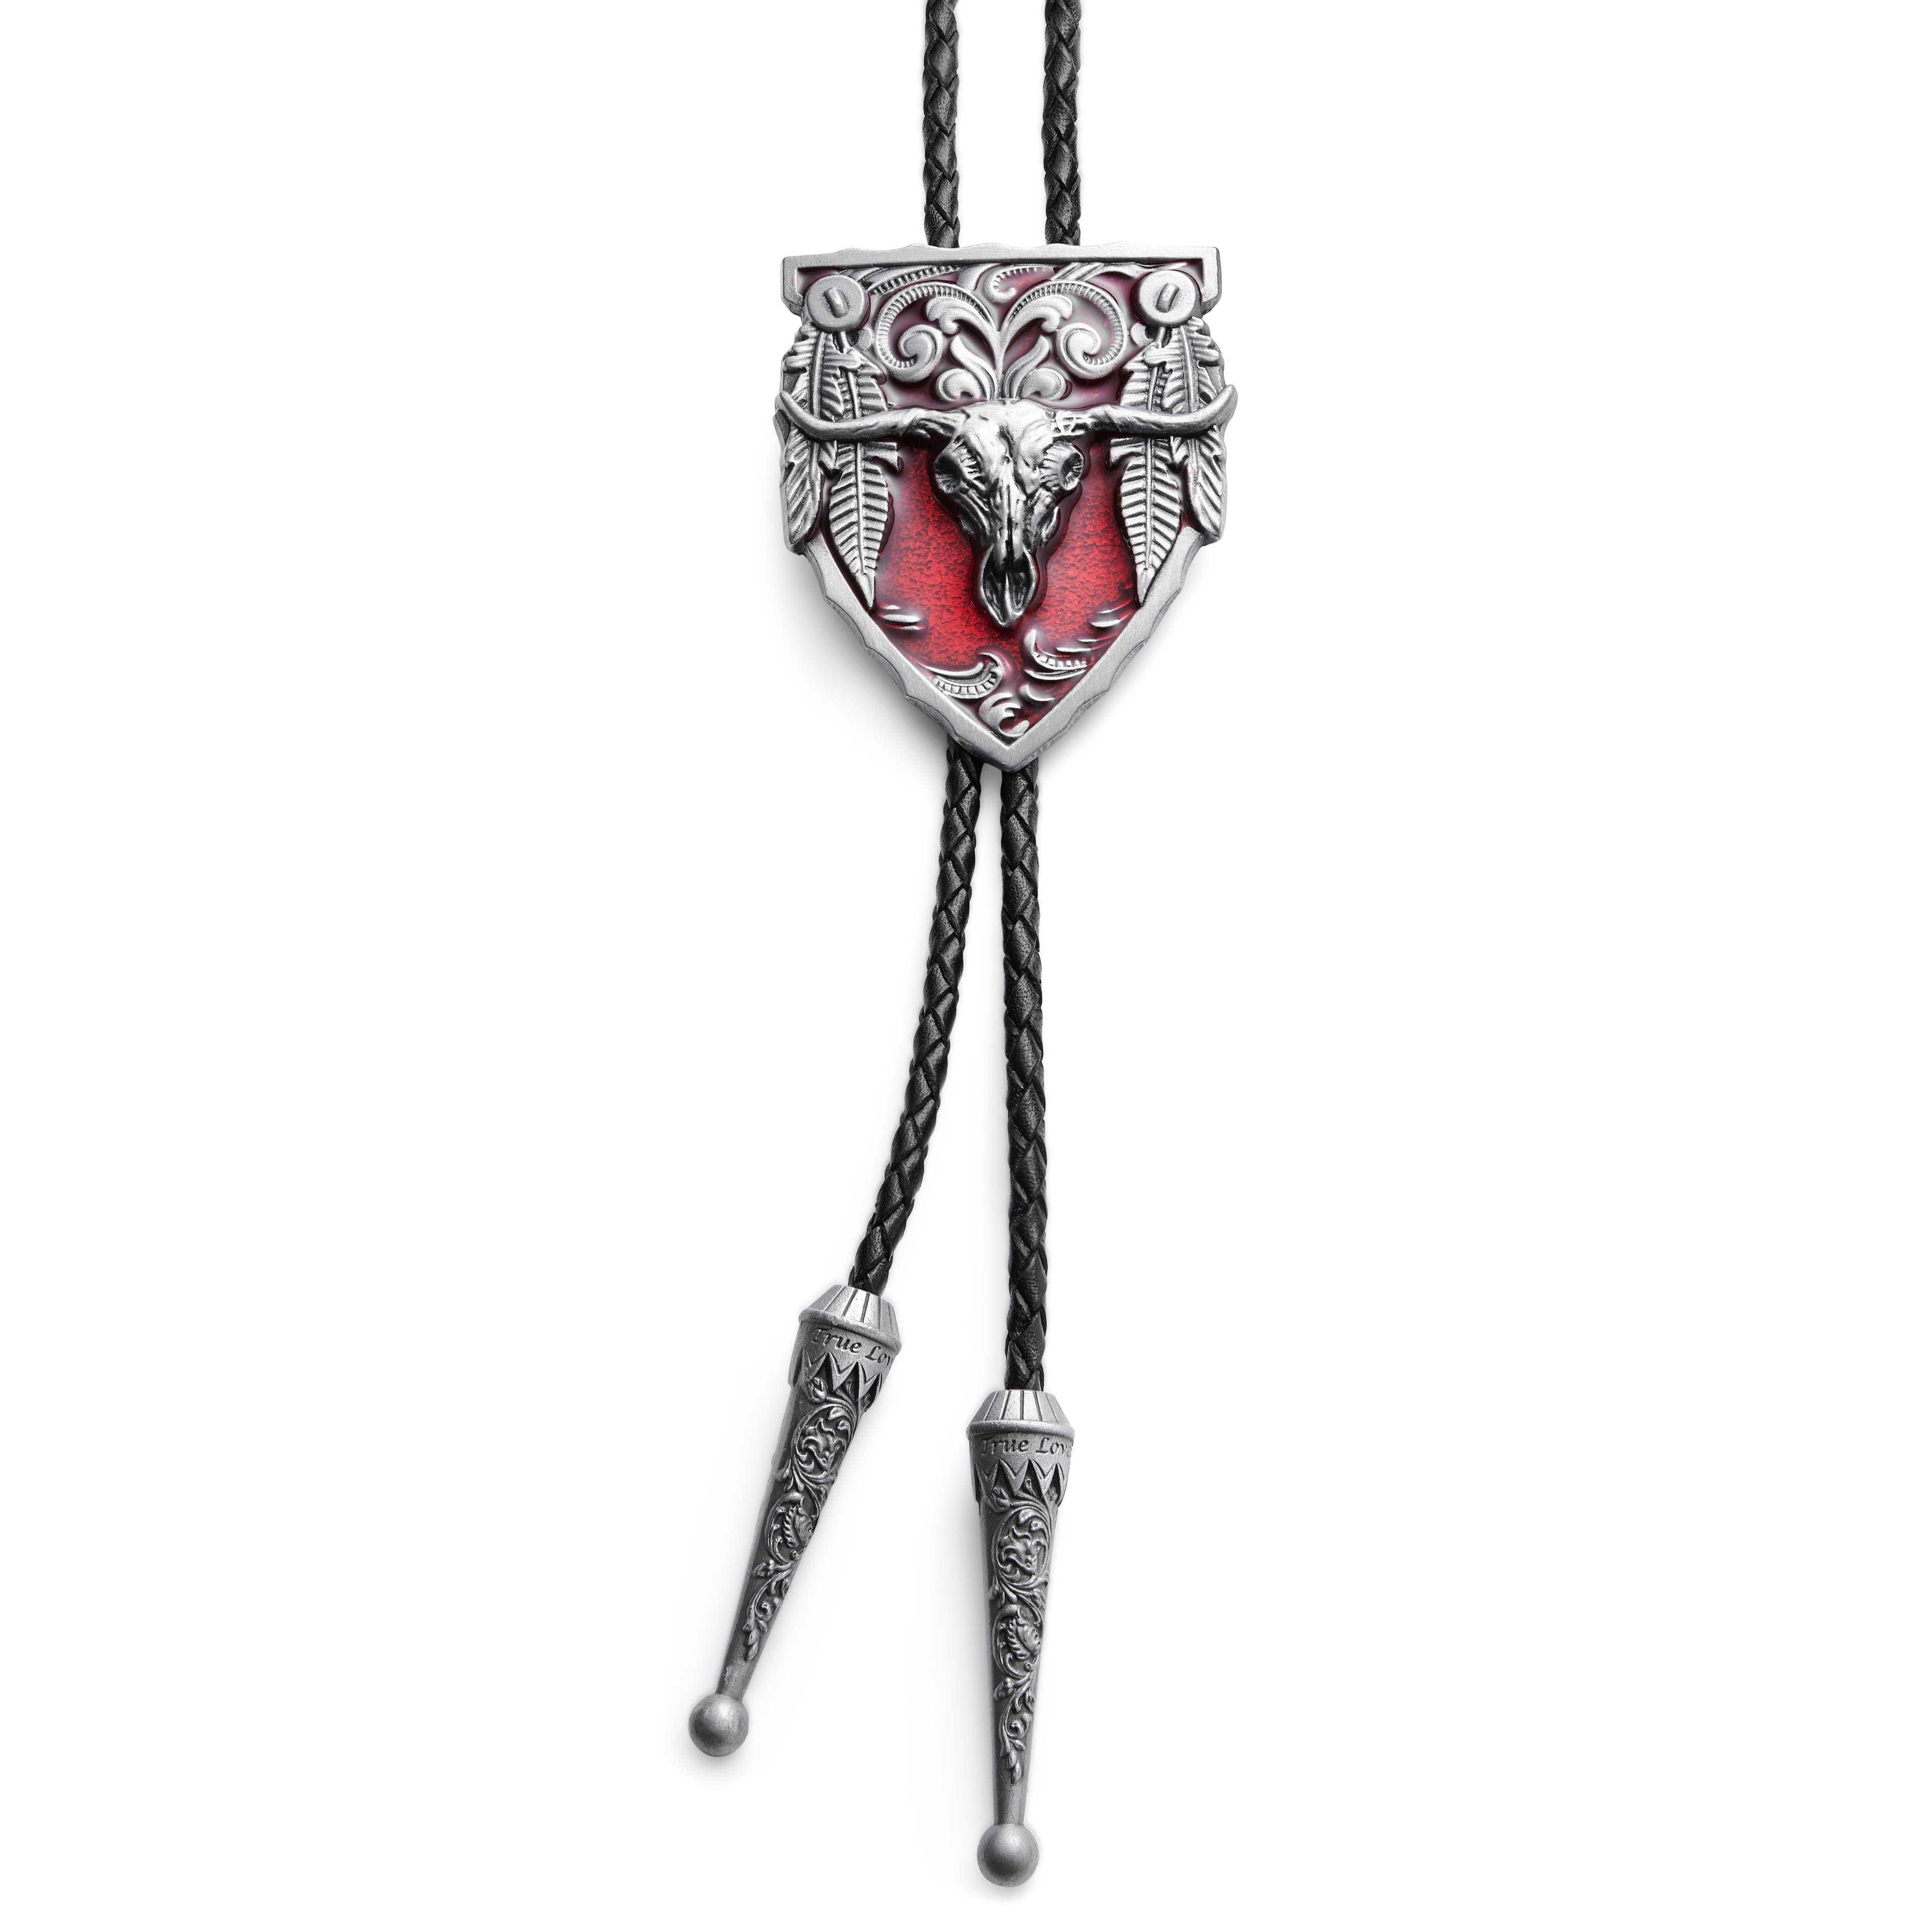 Red & Metal Longhorn Adjustable Braided Leather Bolo Tie